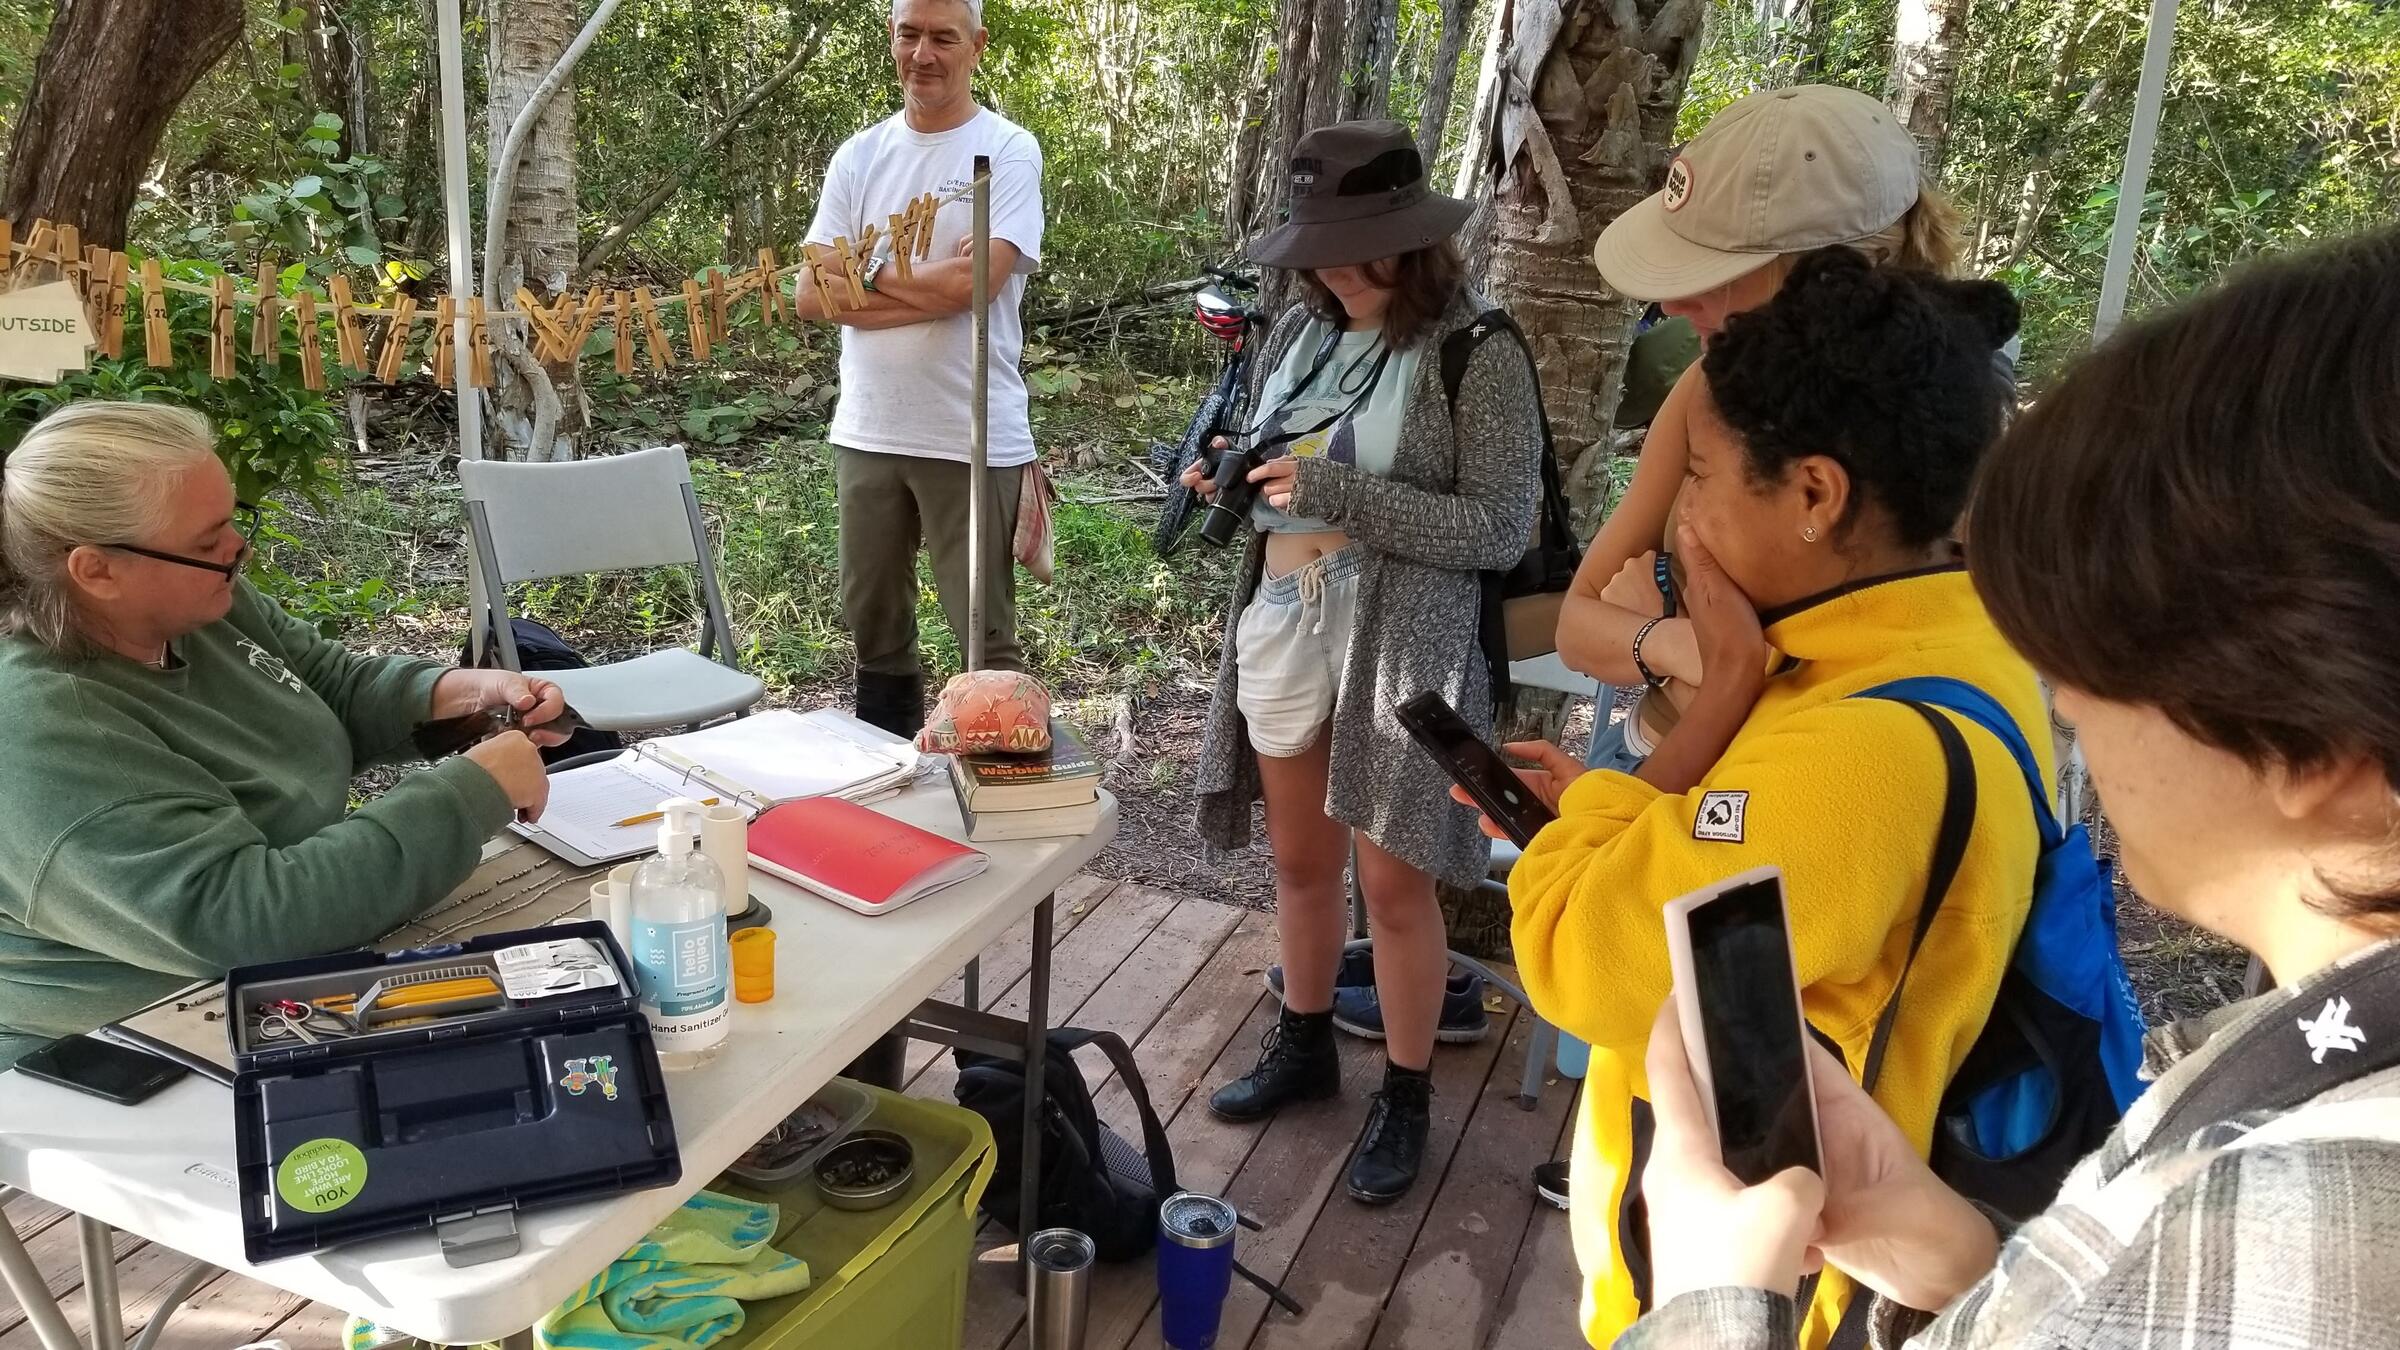 Conservation Leadership Initiative students visit bird-banding sites to learn more about research and conservation. Photo shows students gathered around a table where someone holds a bird.